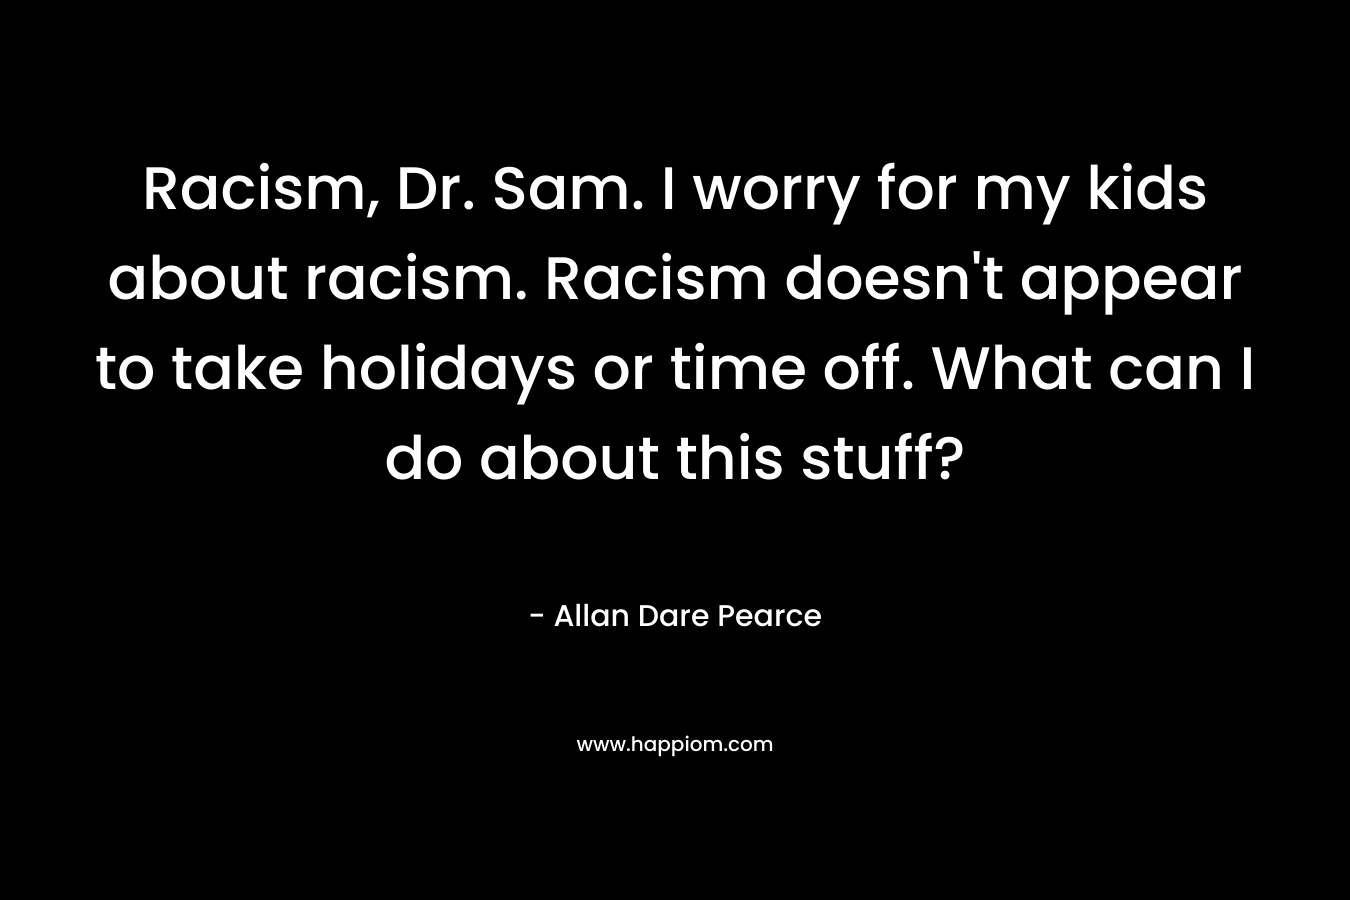 Racism, Dr. Sam. I worry for my kids about racism. Racism doesn't appear to take holidays or time off. What can I do about this stuff?